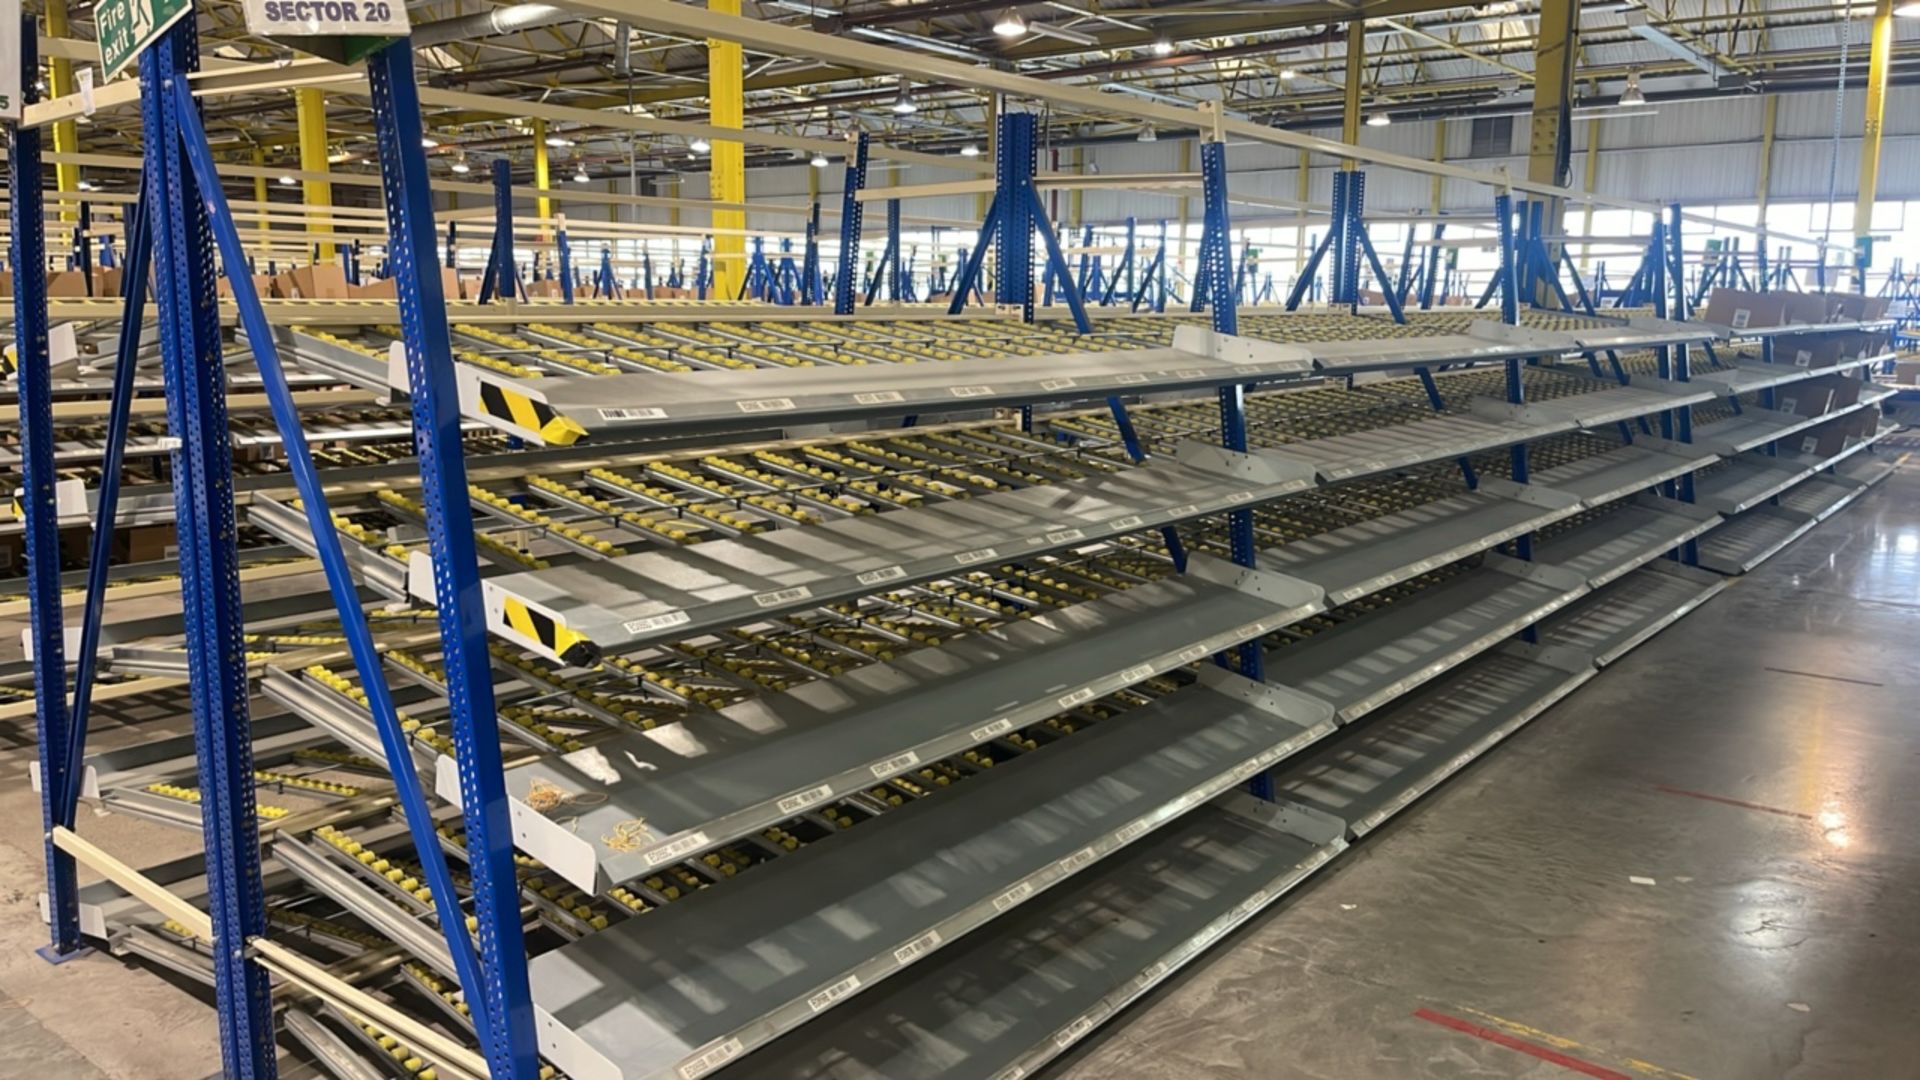 A Run Of 6 Bays Of Back To Back Flow Racks - Image 10 of 10